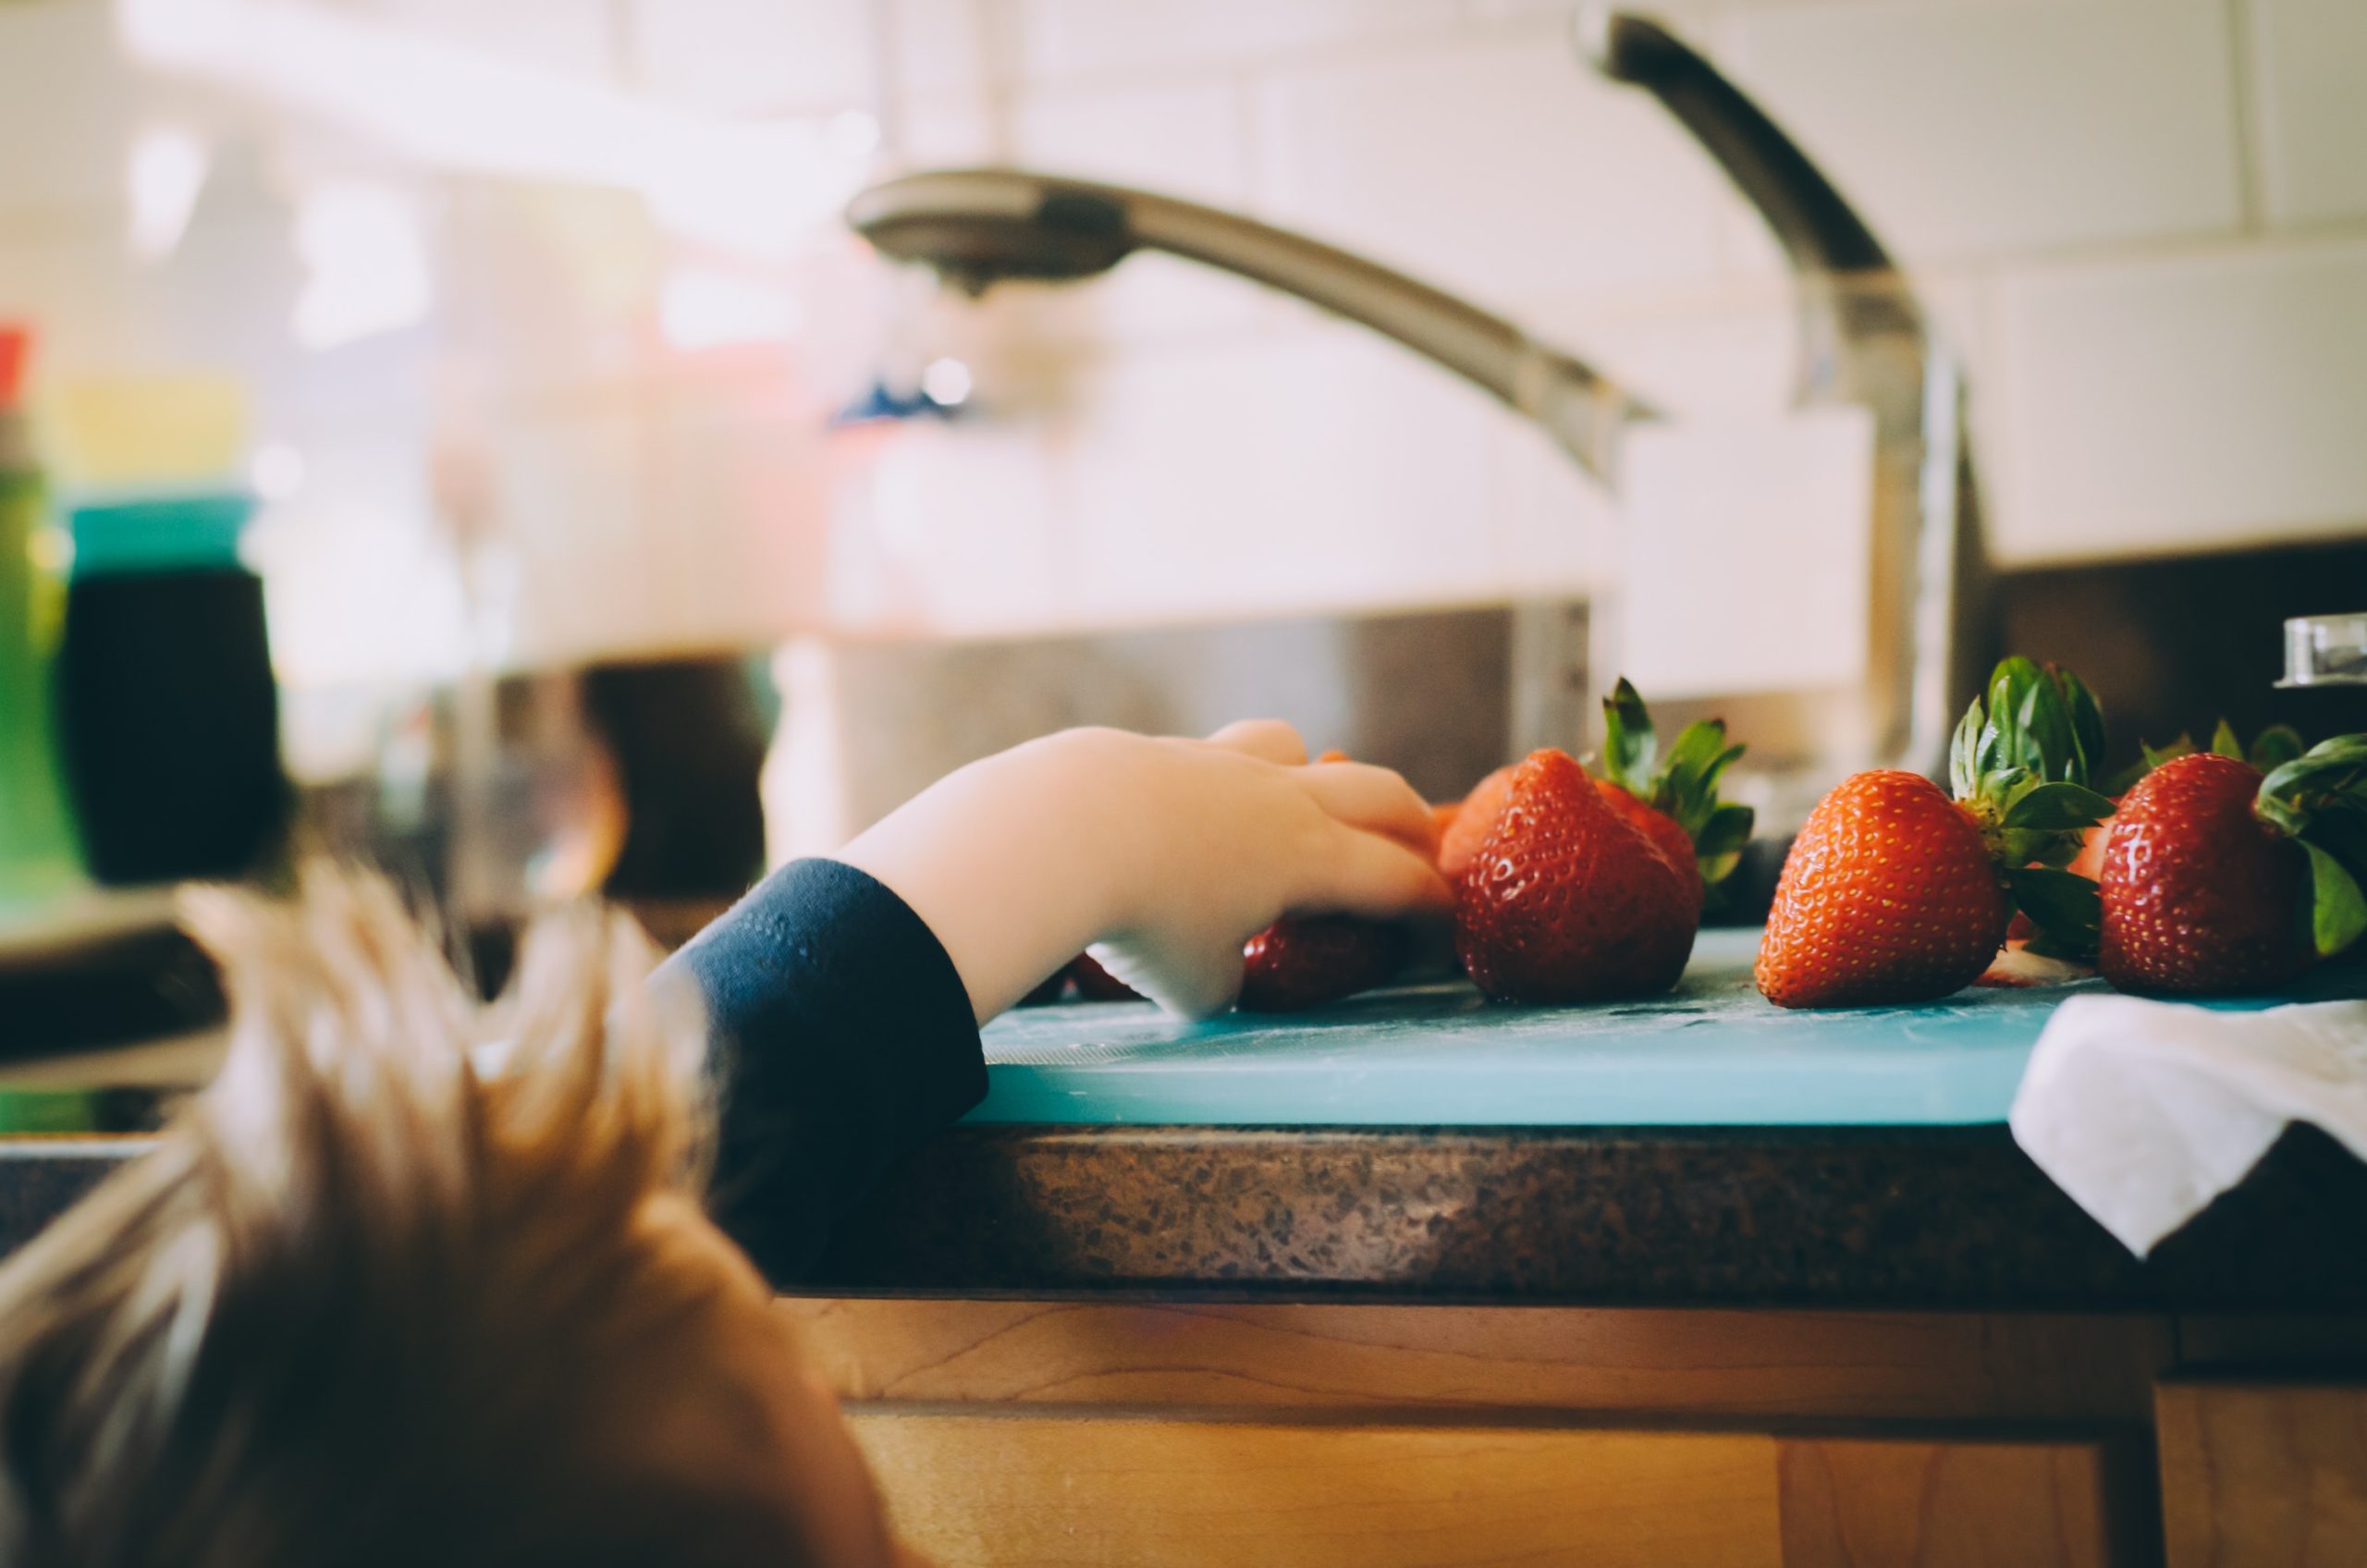 A child reaches up onto the counter for a fresh strawberry.